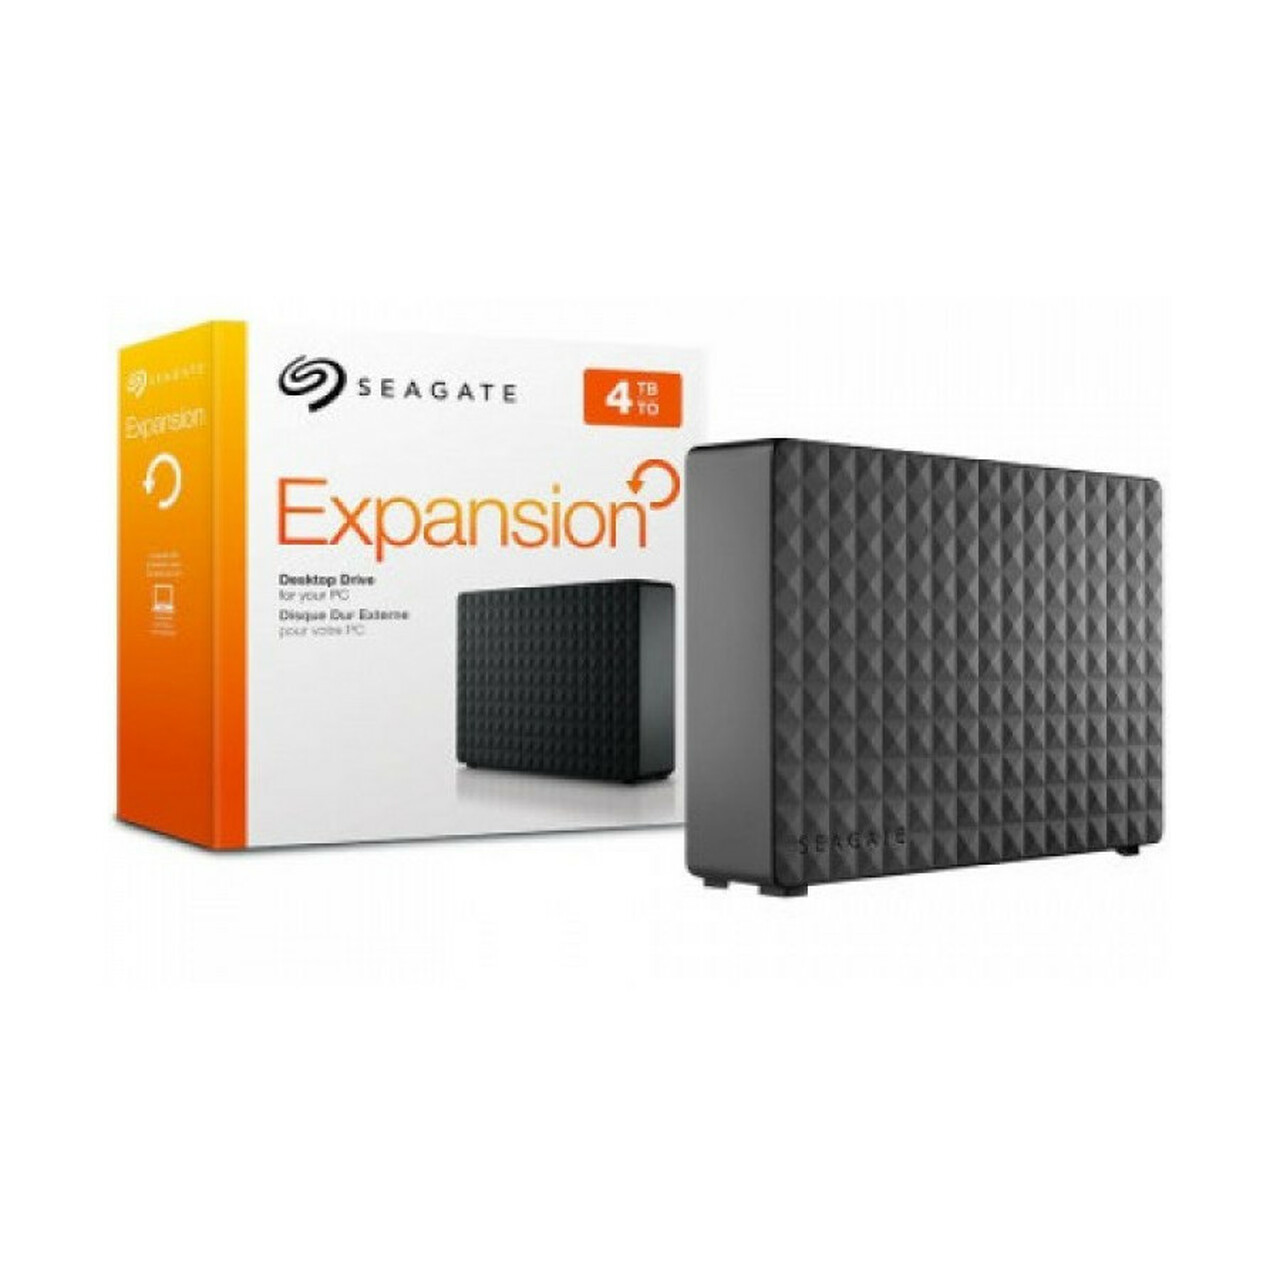 4TB SEAGATE EXPANSION EXTERNAL HDD USB 3,0